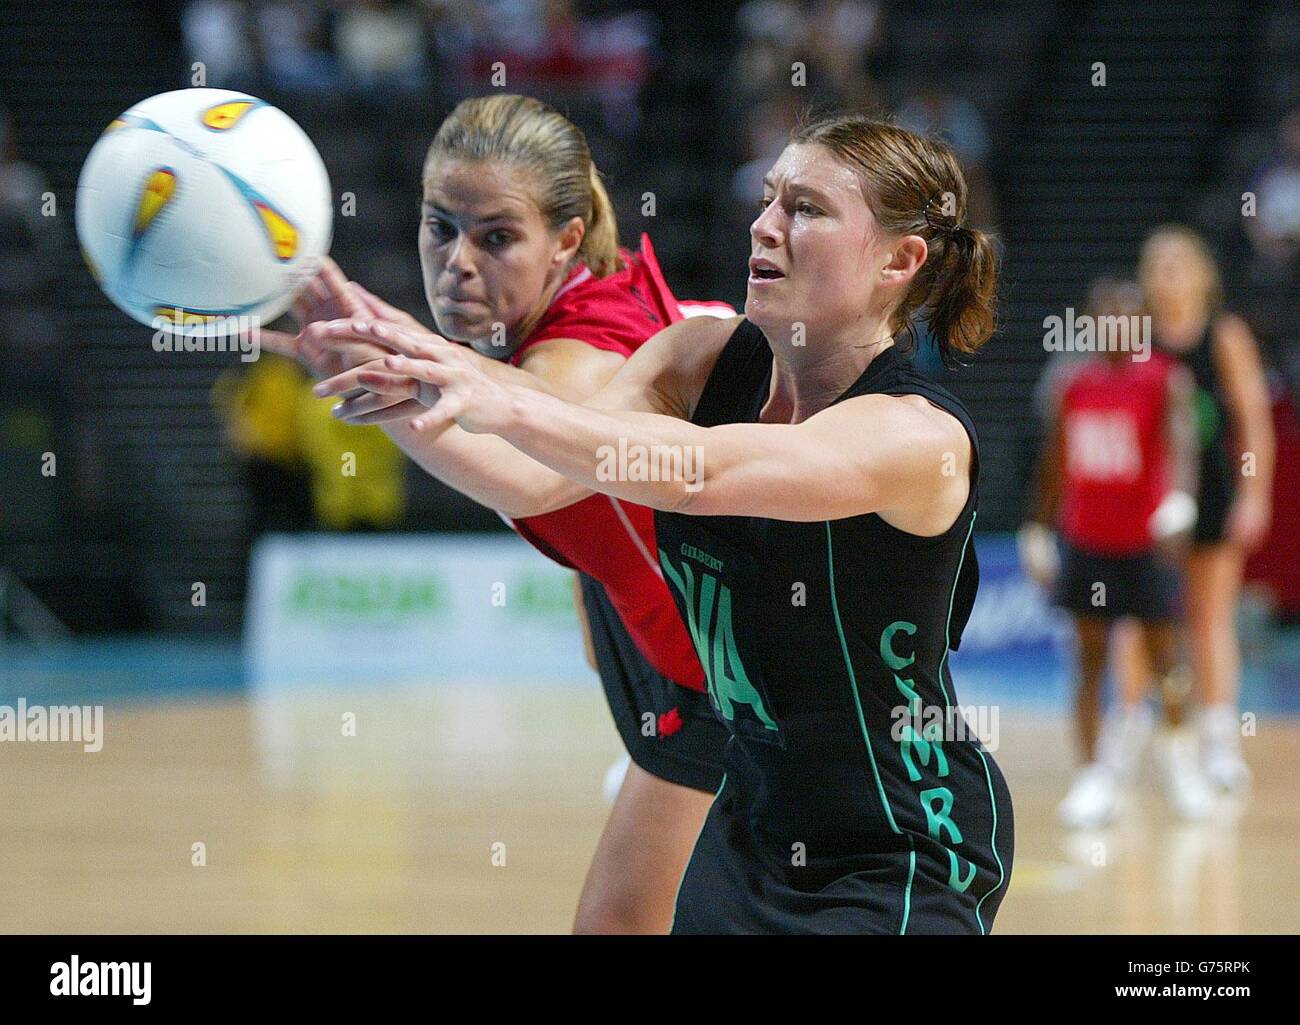 Wales Wing Attack Helen Case (R) battles with Canada's Wing Defence Joanne Burns, in Commonwealth Games Womens Netball, at the MEN Arena in Manchester. Stock Photo